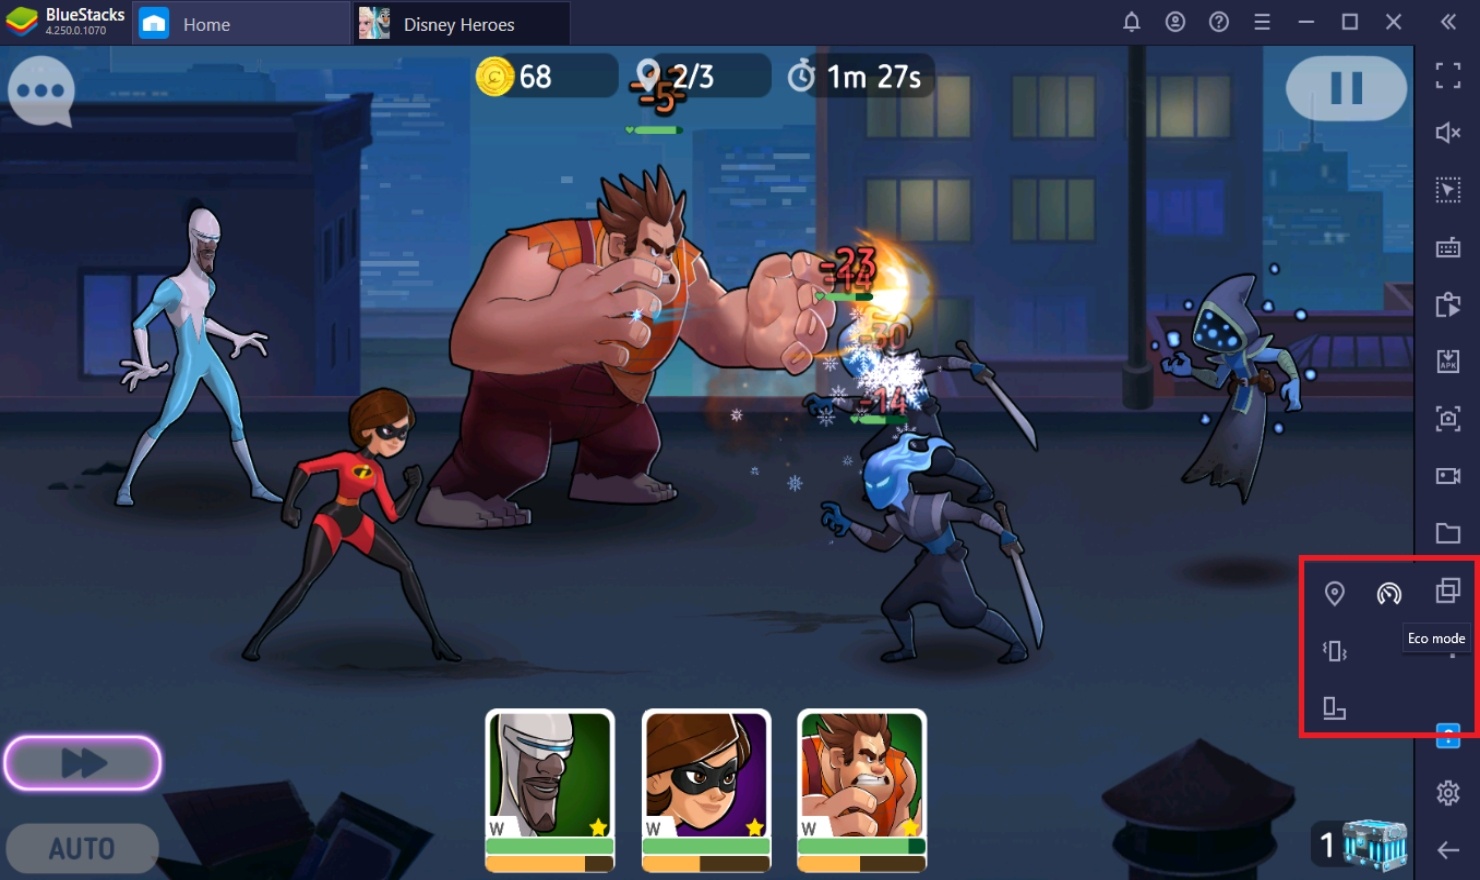 How to Play Disney Heroes: Battle Mode on PC with BlueStacks